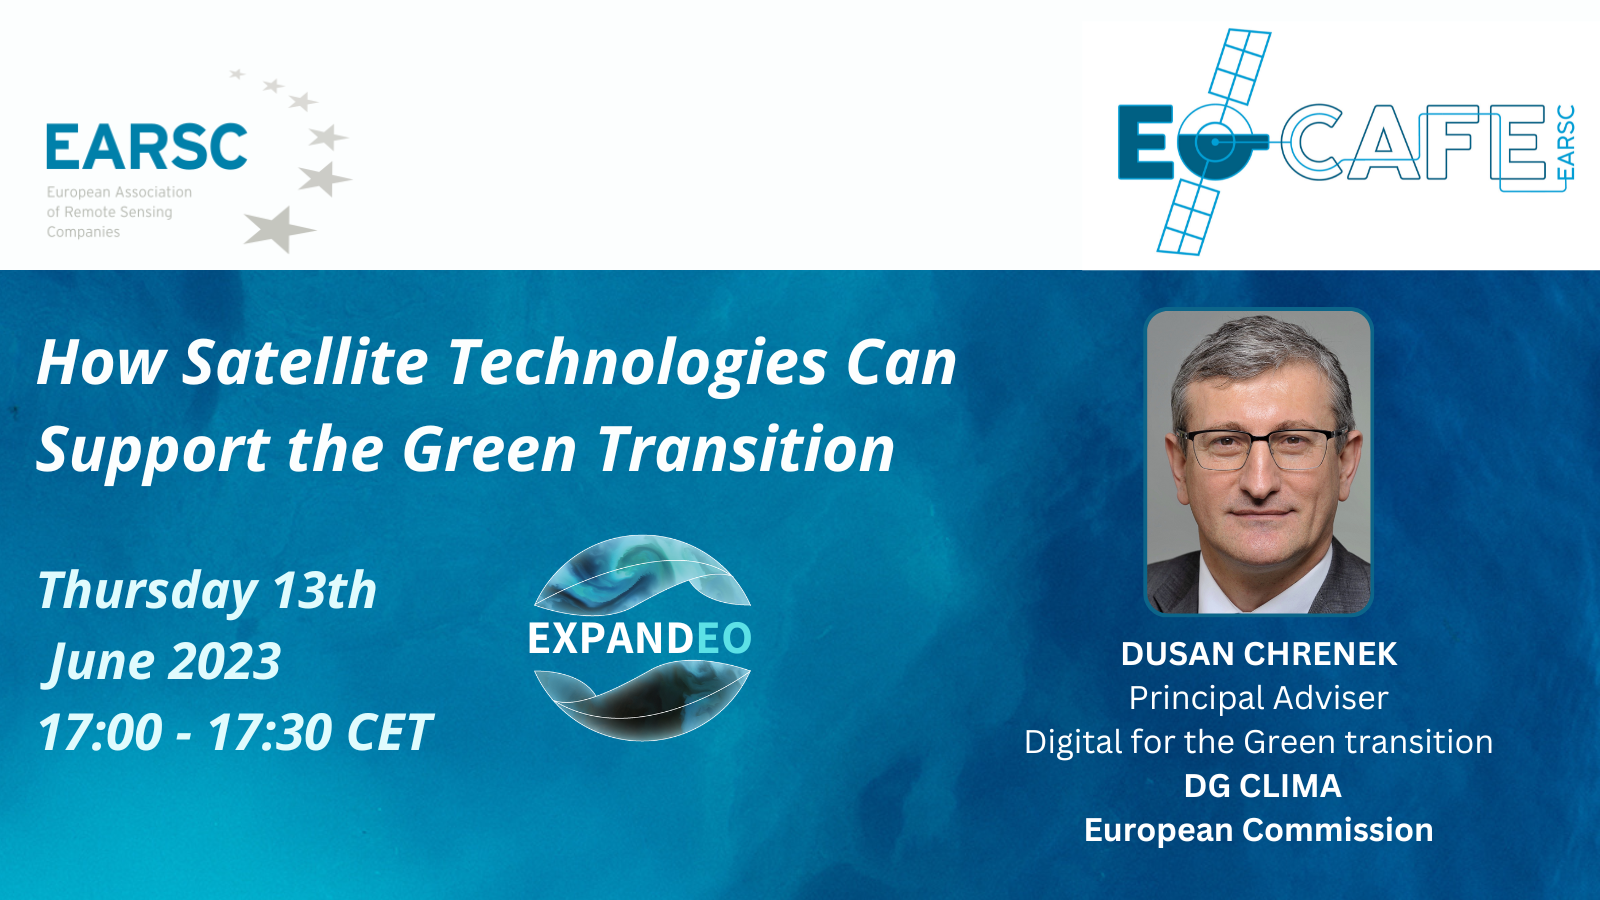 EOcafe special edition EXPANDEO: How Satellite Technologies Can Support the Green Transition